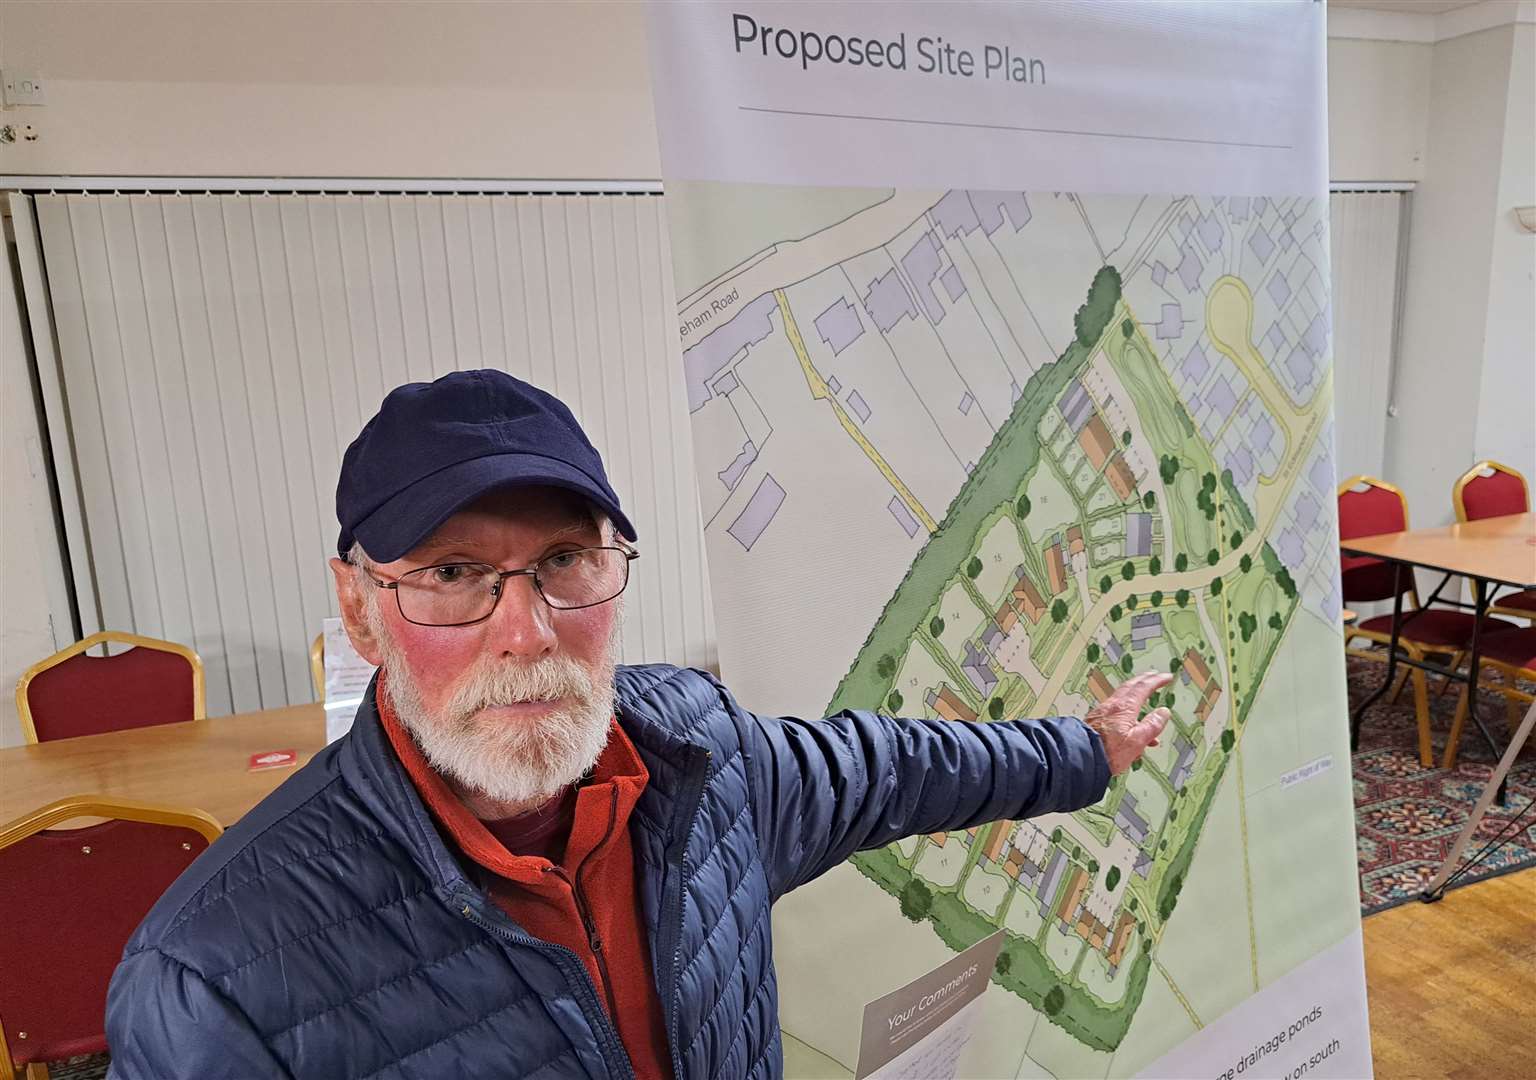 Neighbour Tony Timperley viewing the development plan for St Edmunds Road, Great Mongeham, Deal